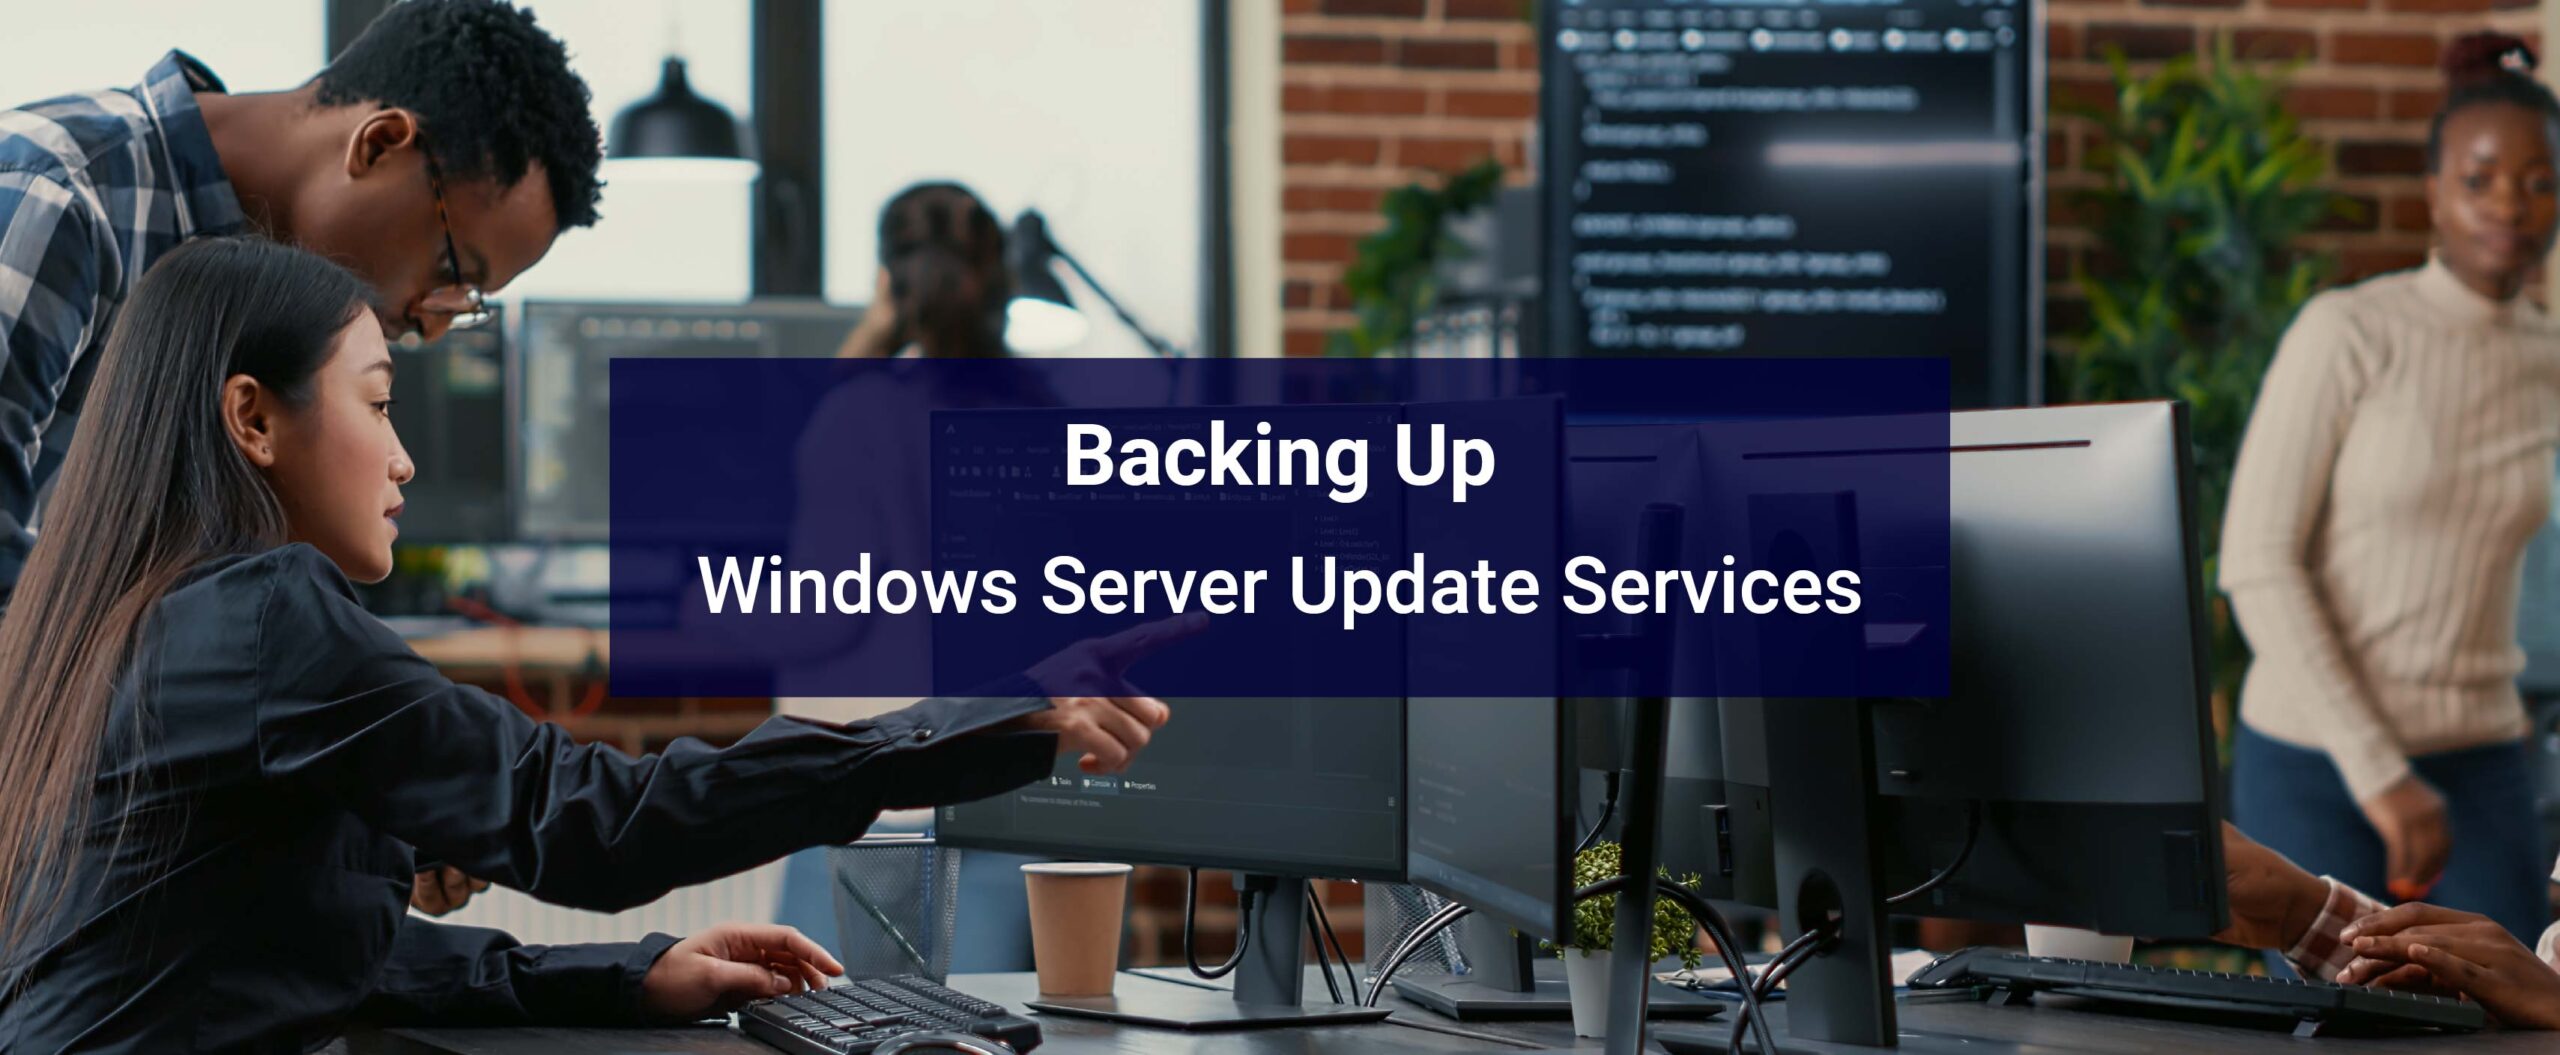 Backing Up Windows Server Update Services